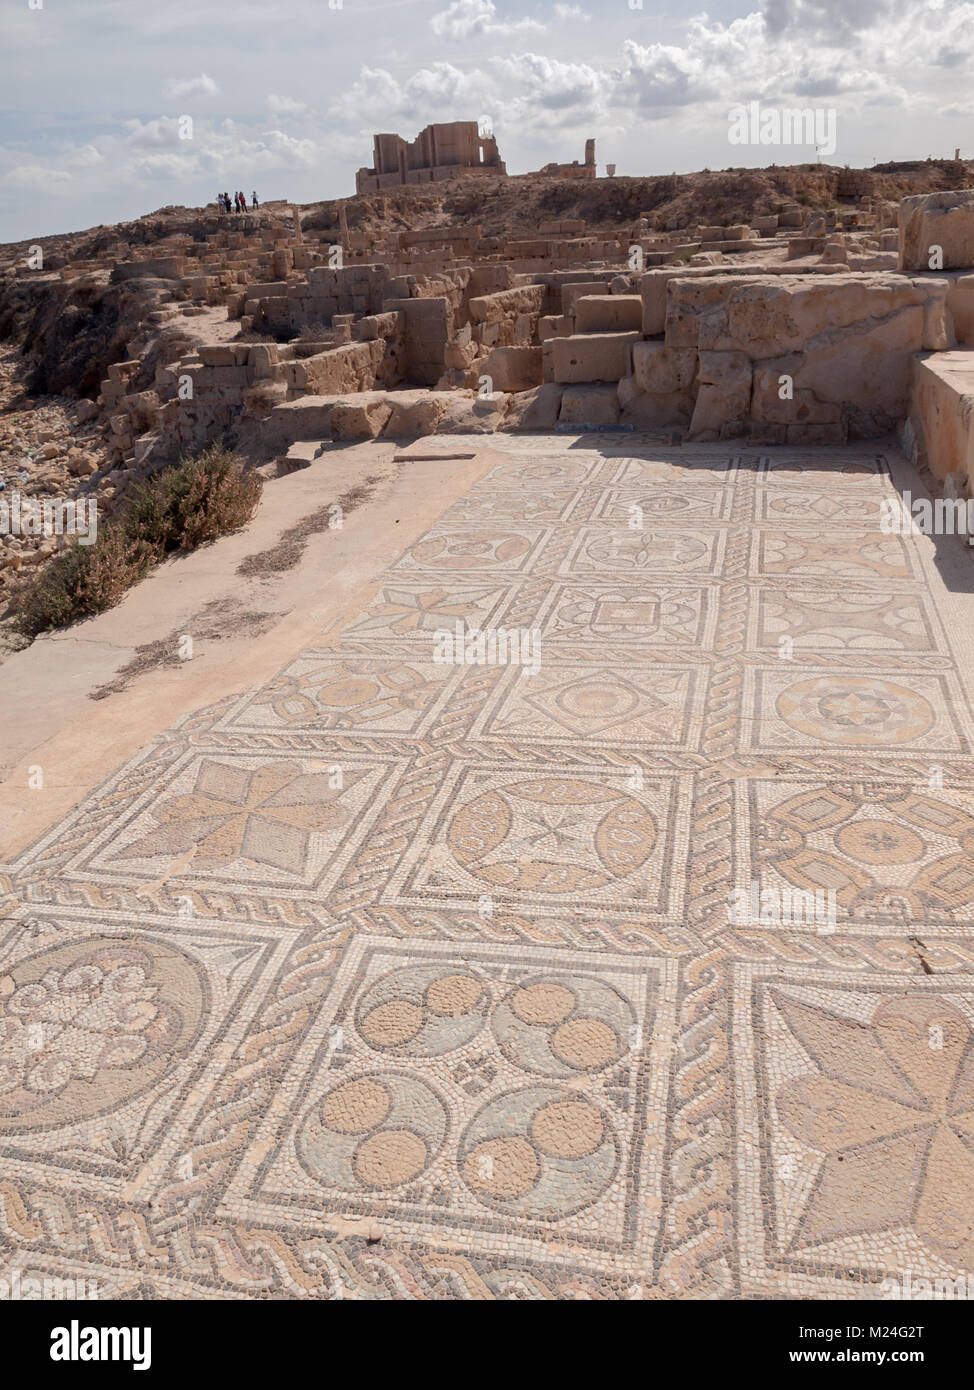 Mosaic of the Roman ruins of the Baths of Oceanus in Sabratha Stock Photo